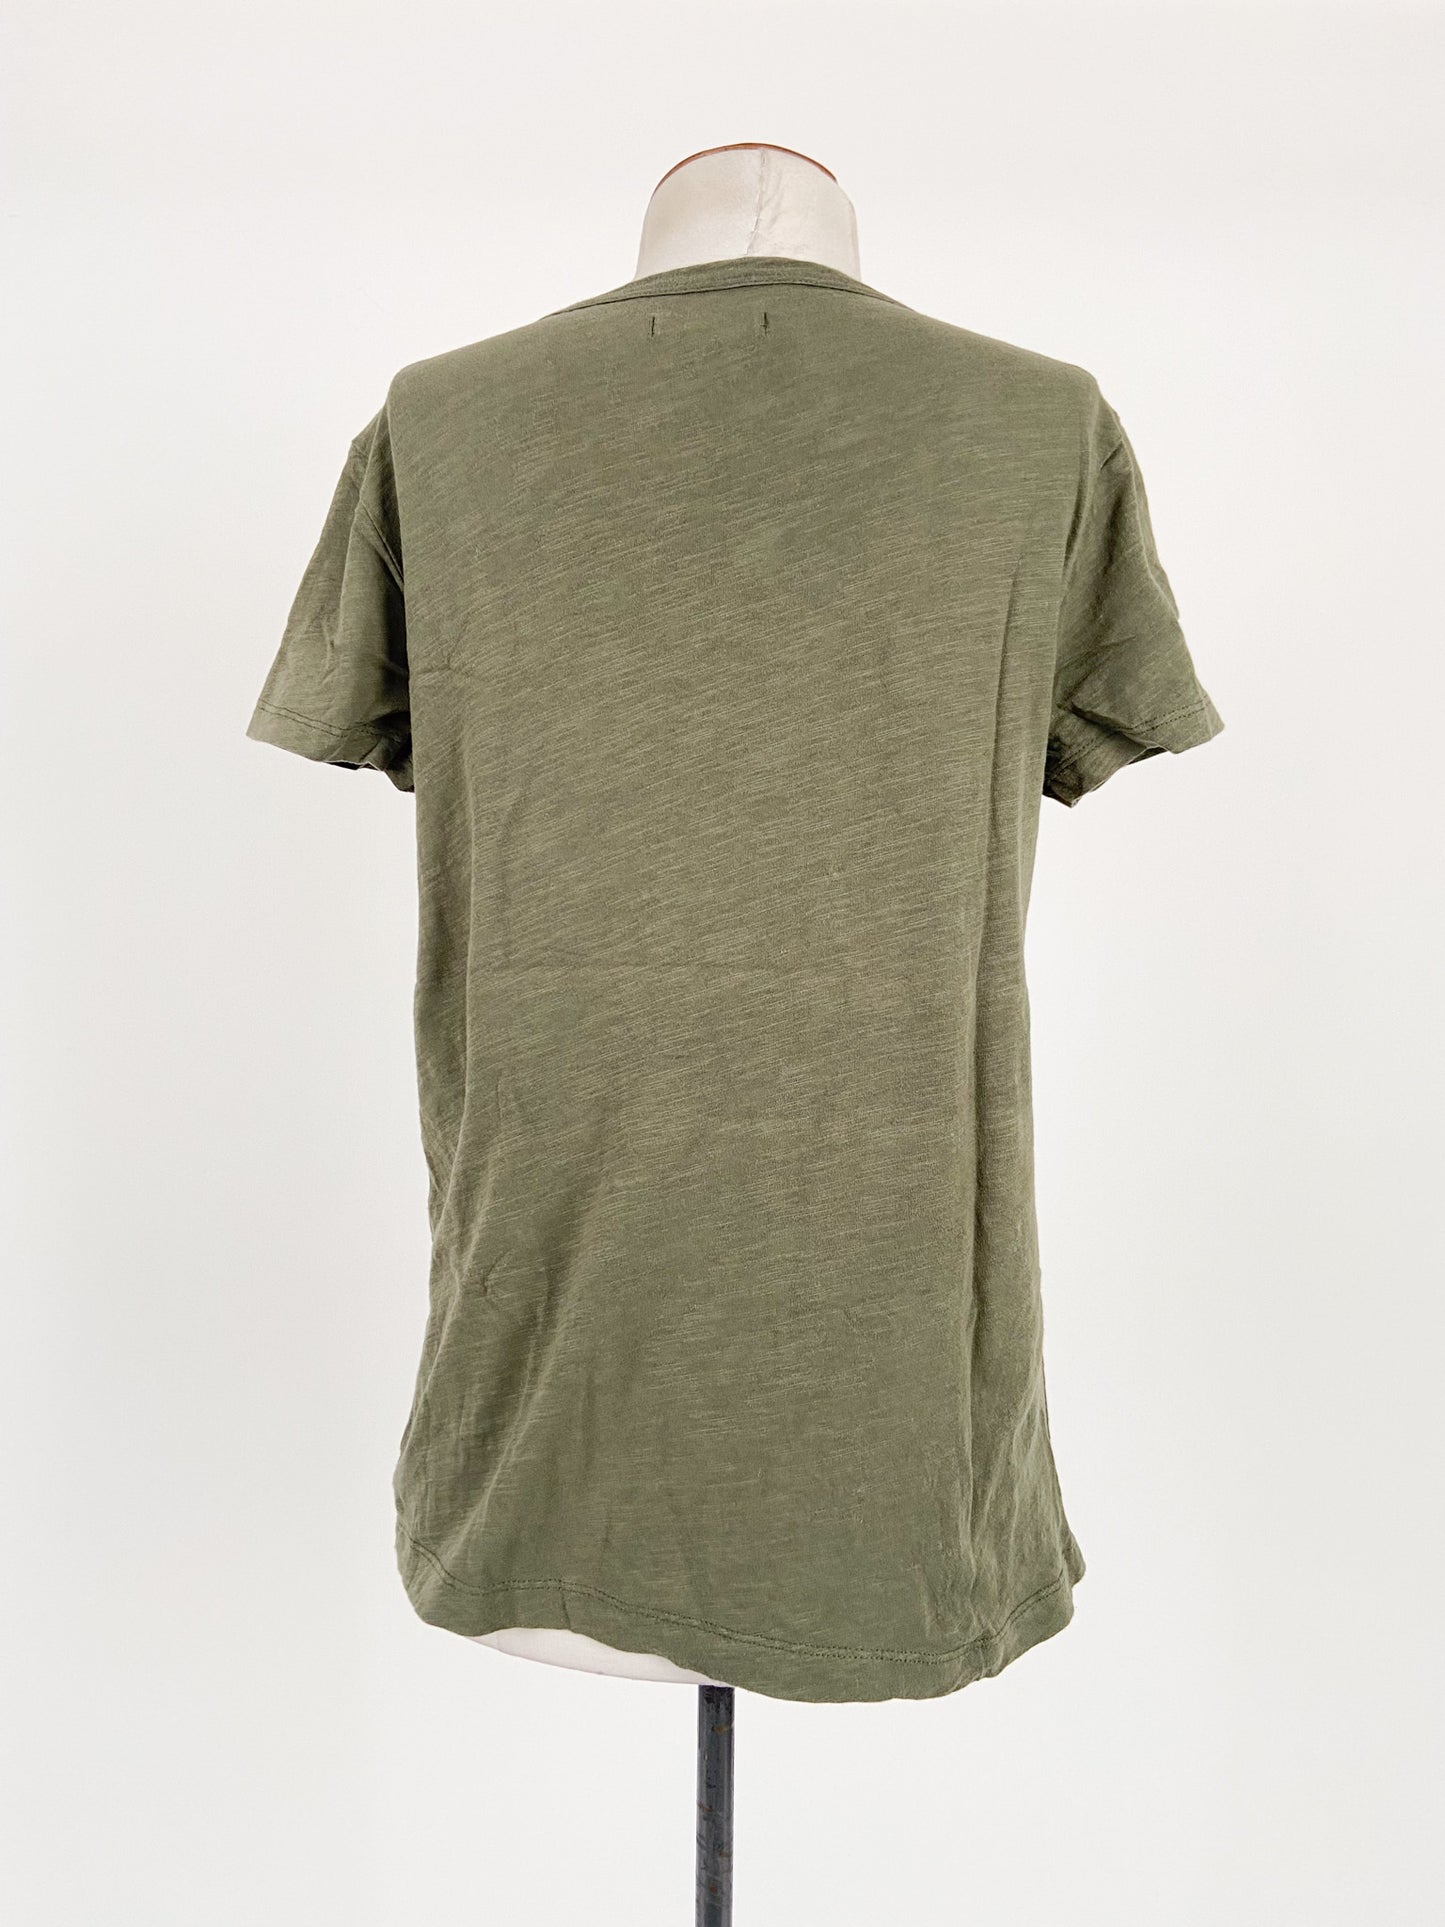 R.M Williams | Green Casual Top | Size 8